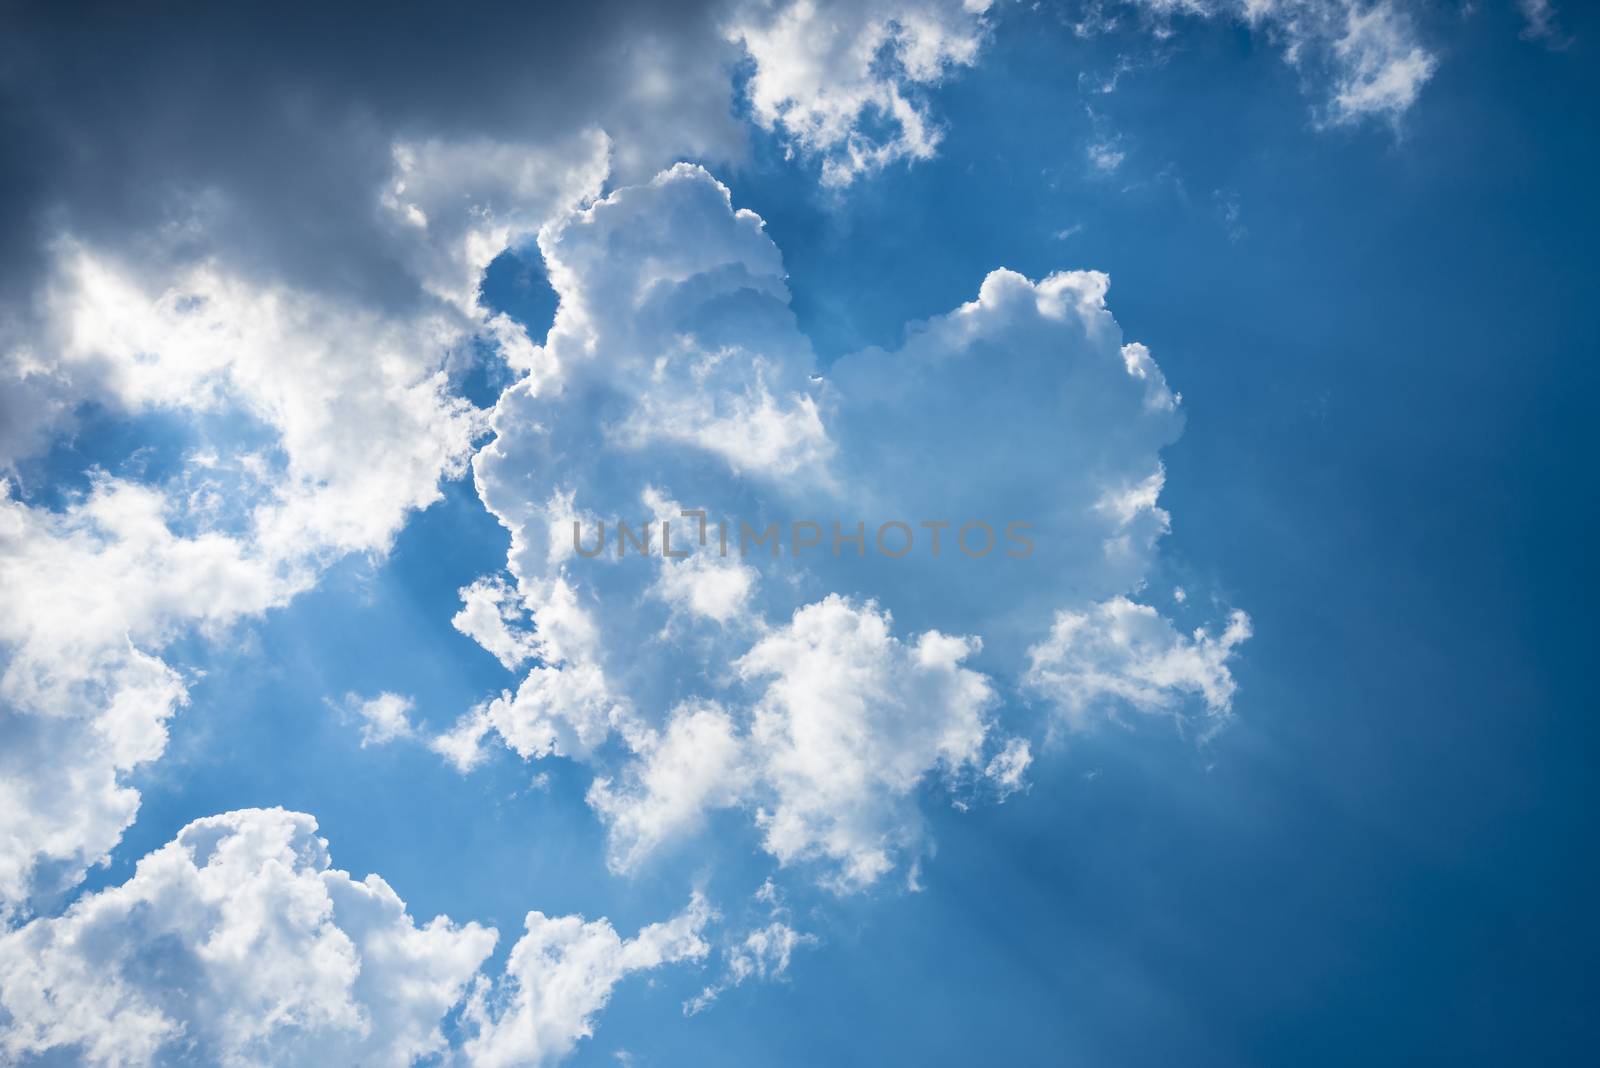 White clouds on the blue sky during the day. Nature landscape